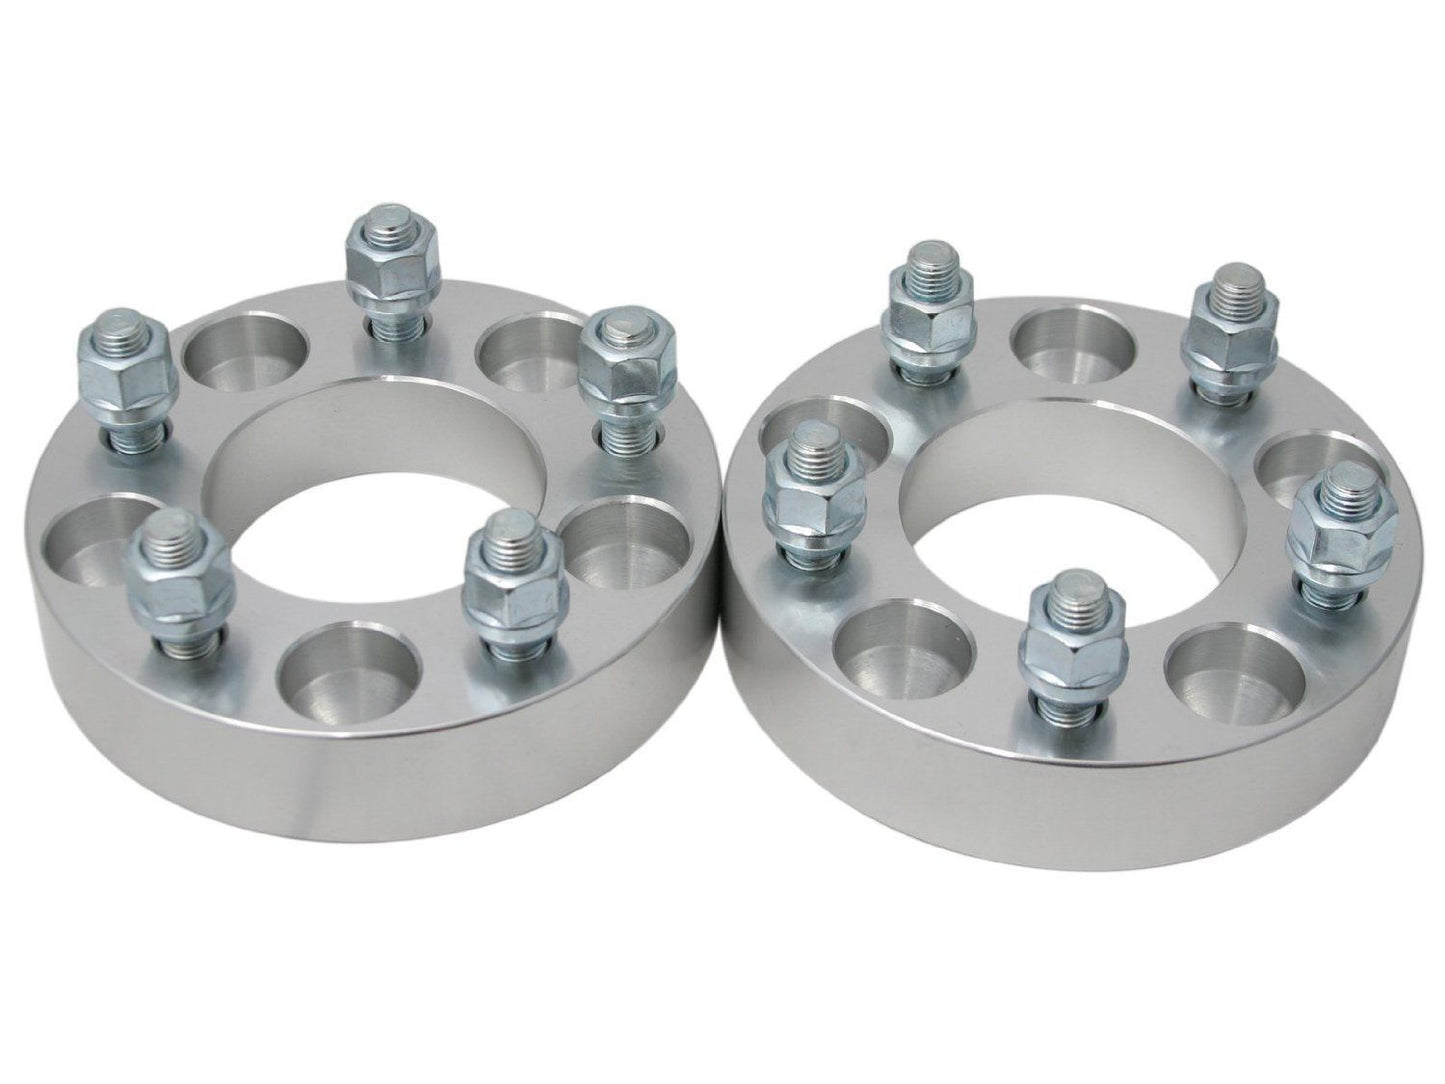 2 pc 1.5" 5x5.5 to 5x5 Wheel Spacers Adapters For Dodge KIA Ford 1/2"x20 Studs